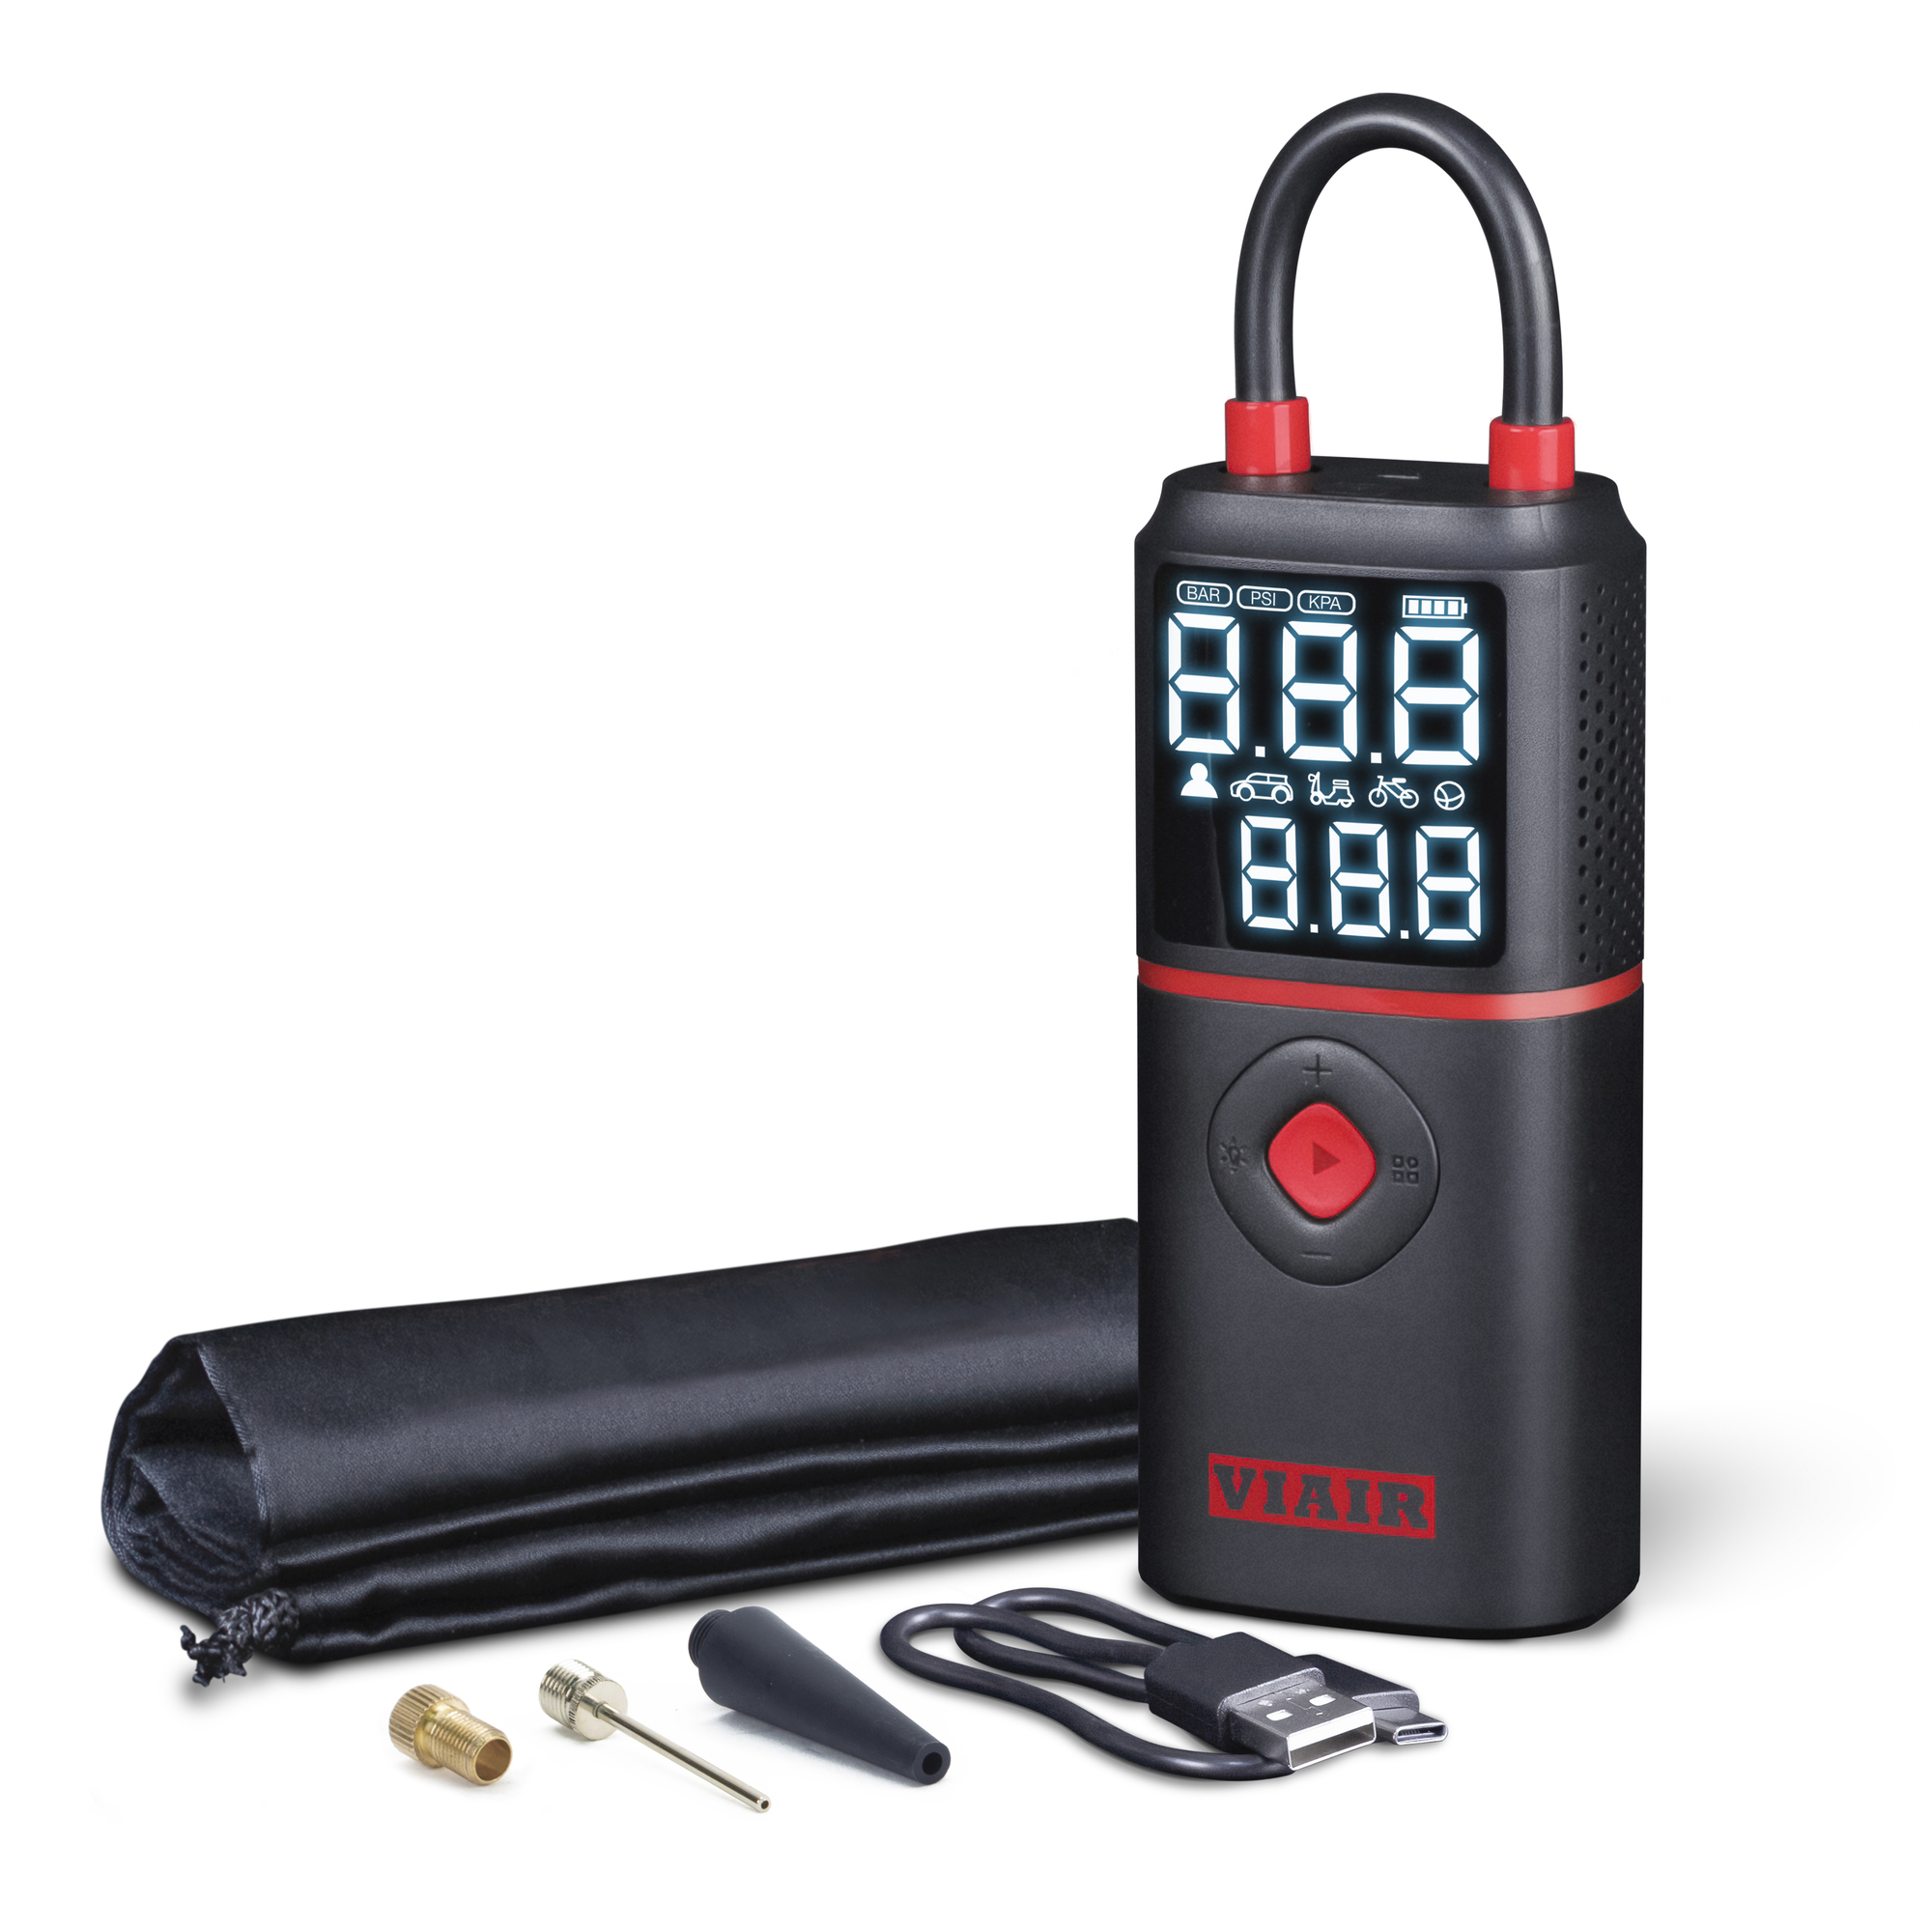 Viair, EVC Every Vehicle CarryTM Rechargeable Portble Tire Inflator, Max. PSI 120 Power Source Battery, Model EVC23P